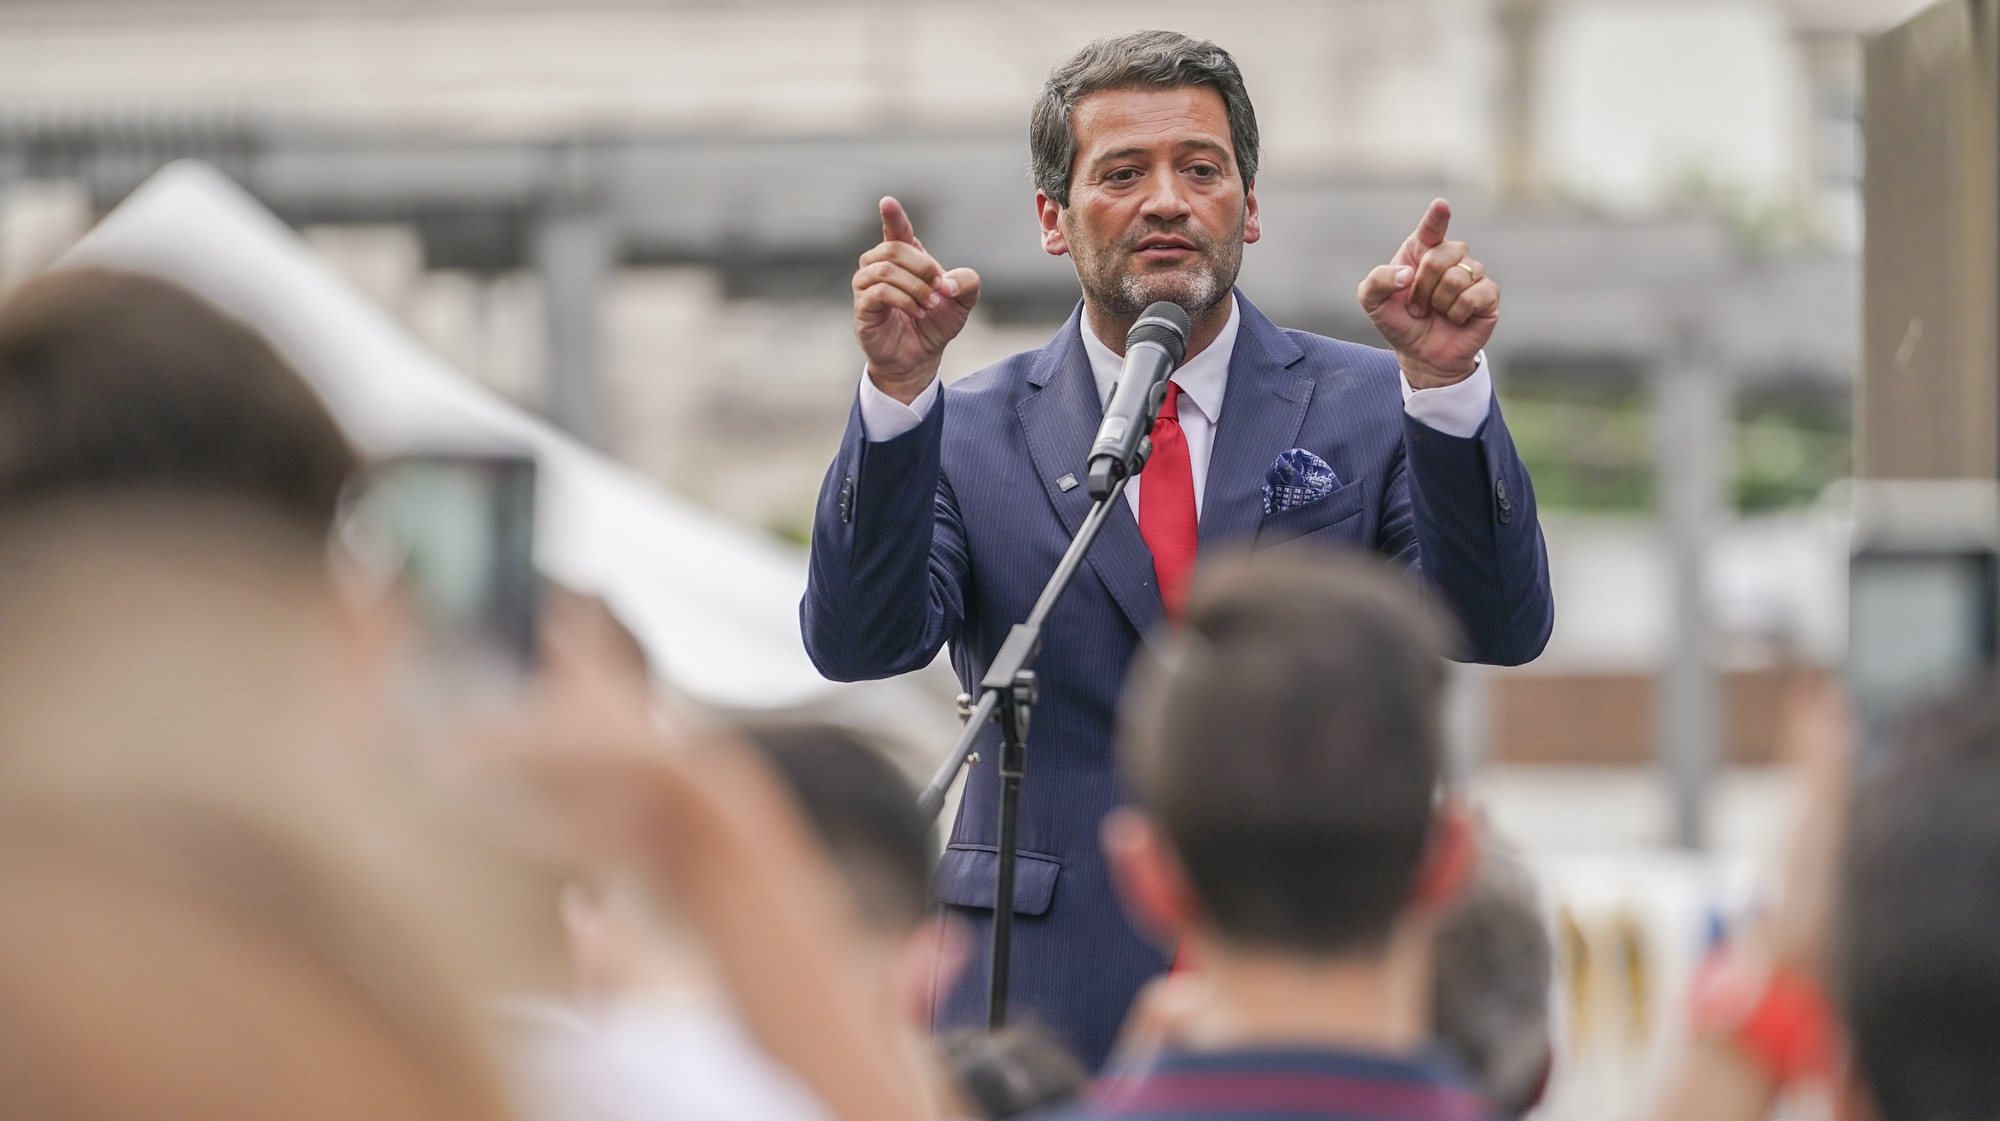 The president of Chega, Andre Ventura, delivers a speech during a rally as part of the campaign for the European elections, in Braga, Portugal, 06 June 2024. In Portugal, the European elections take place on June 9 and will be contested by 17 parties and coalitions. HUGO DELGADO/LUSA